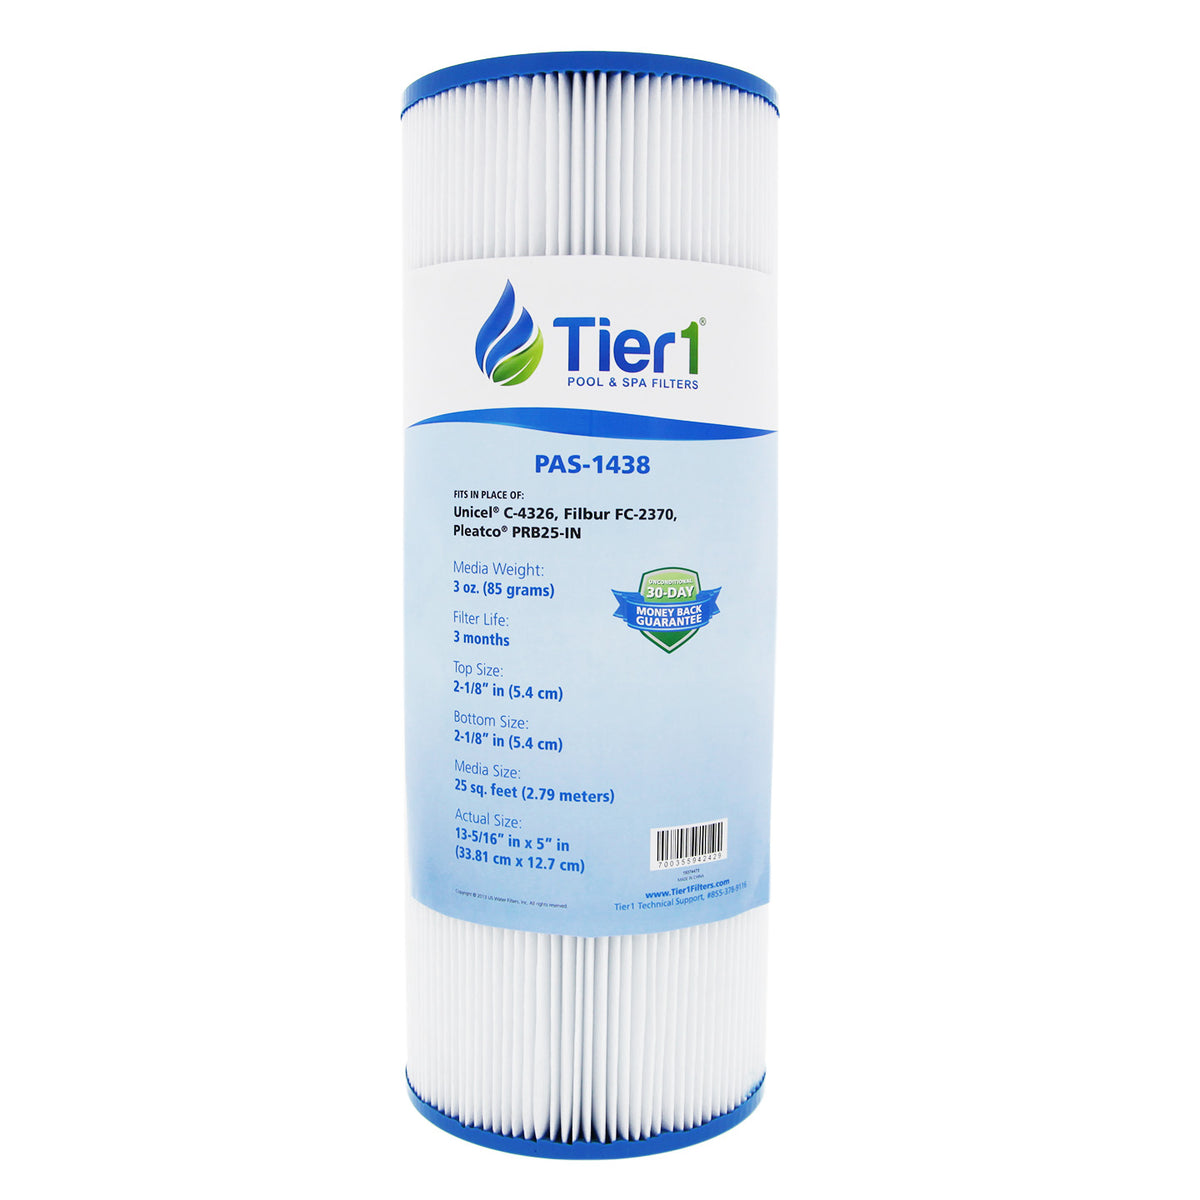 Tier1 Brand Replacement Pool and Spa Filter for 17-2327, 100586, 33521, 25392, 303909, M-4326, 817-2500 &amp; R173429